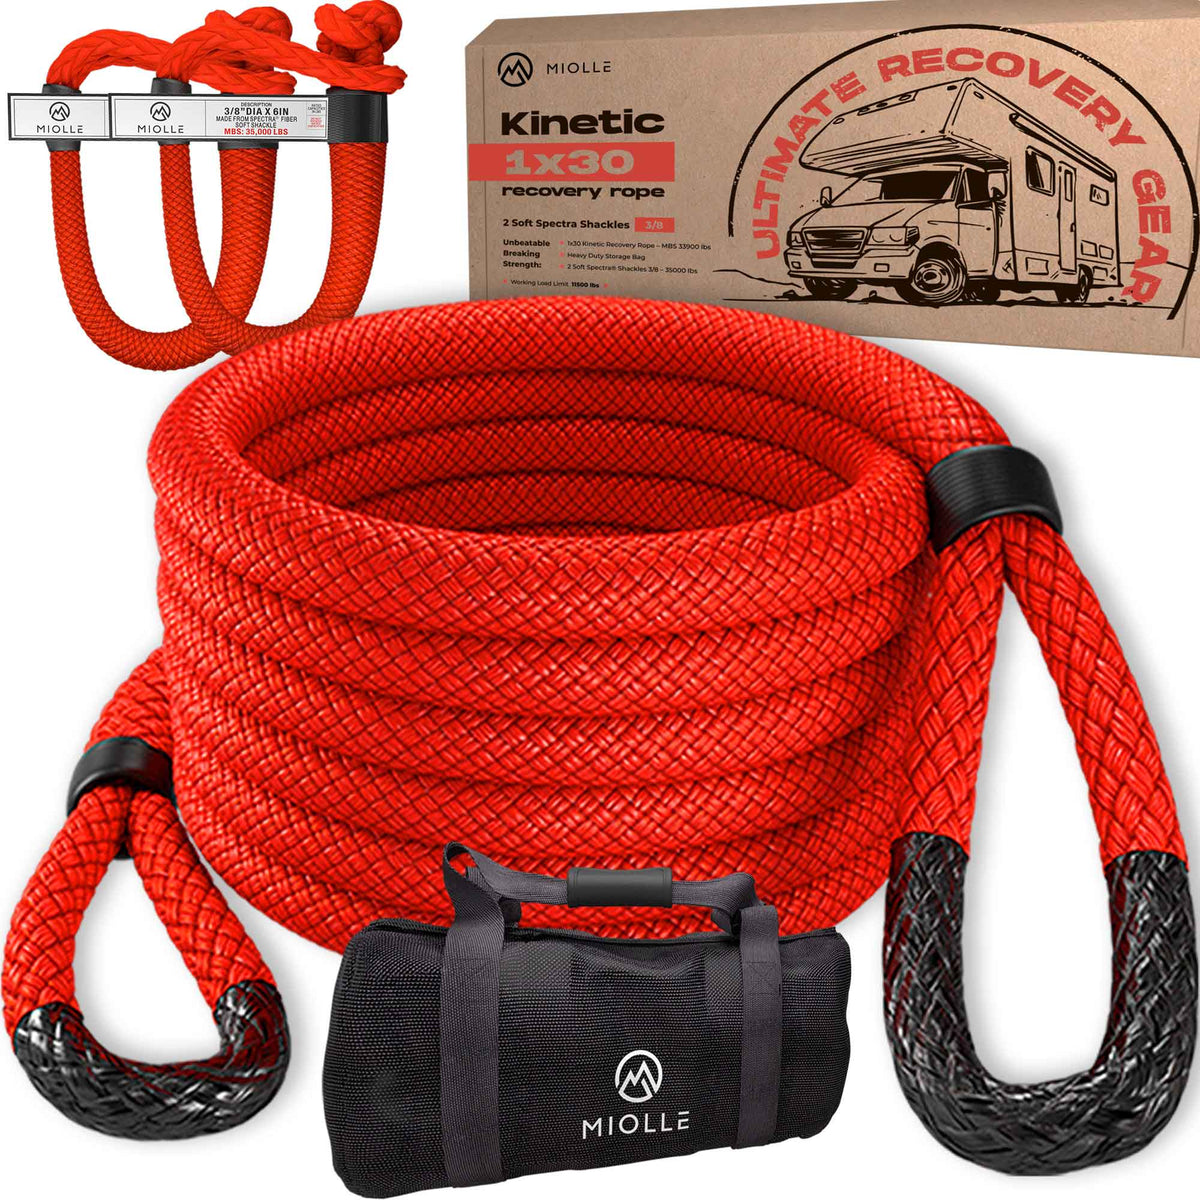 1-1/4 Ultimate Kinetic Recovery Rope + two 1/2 Soft Shackles +